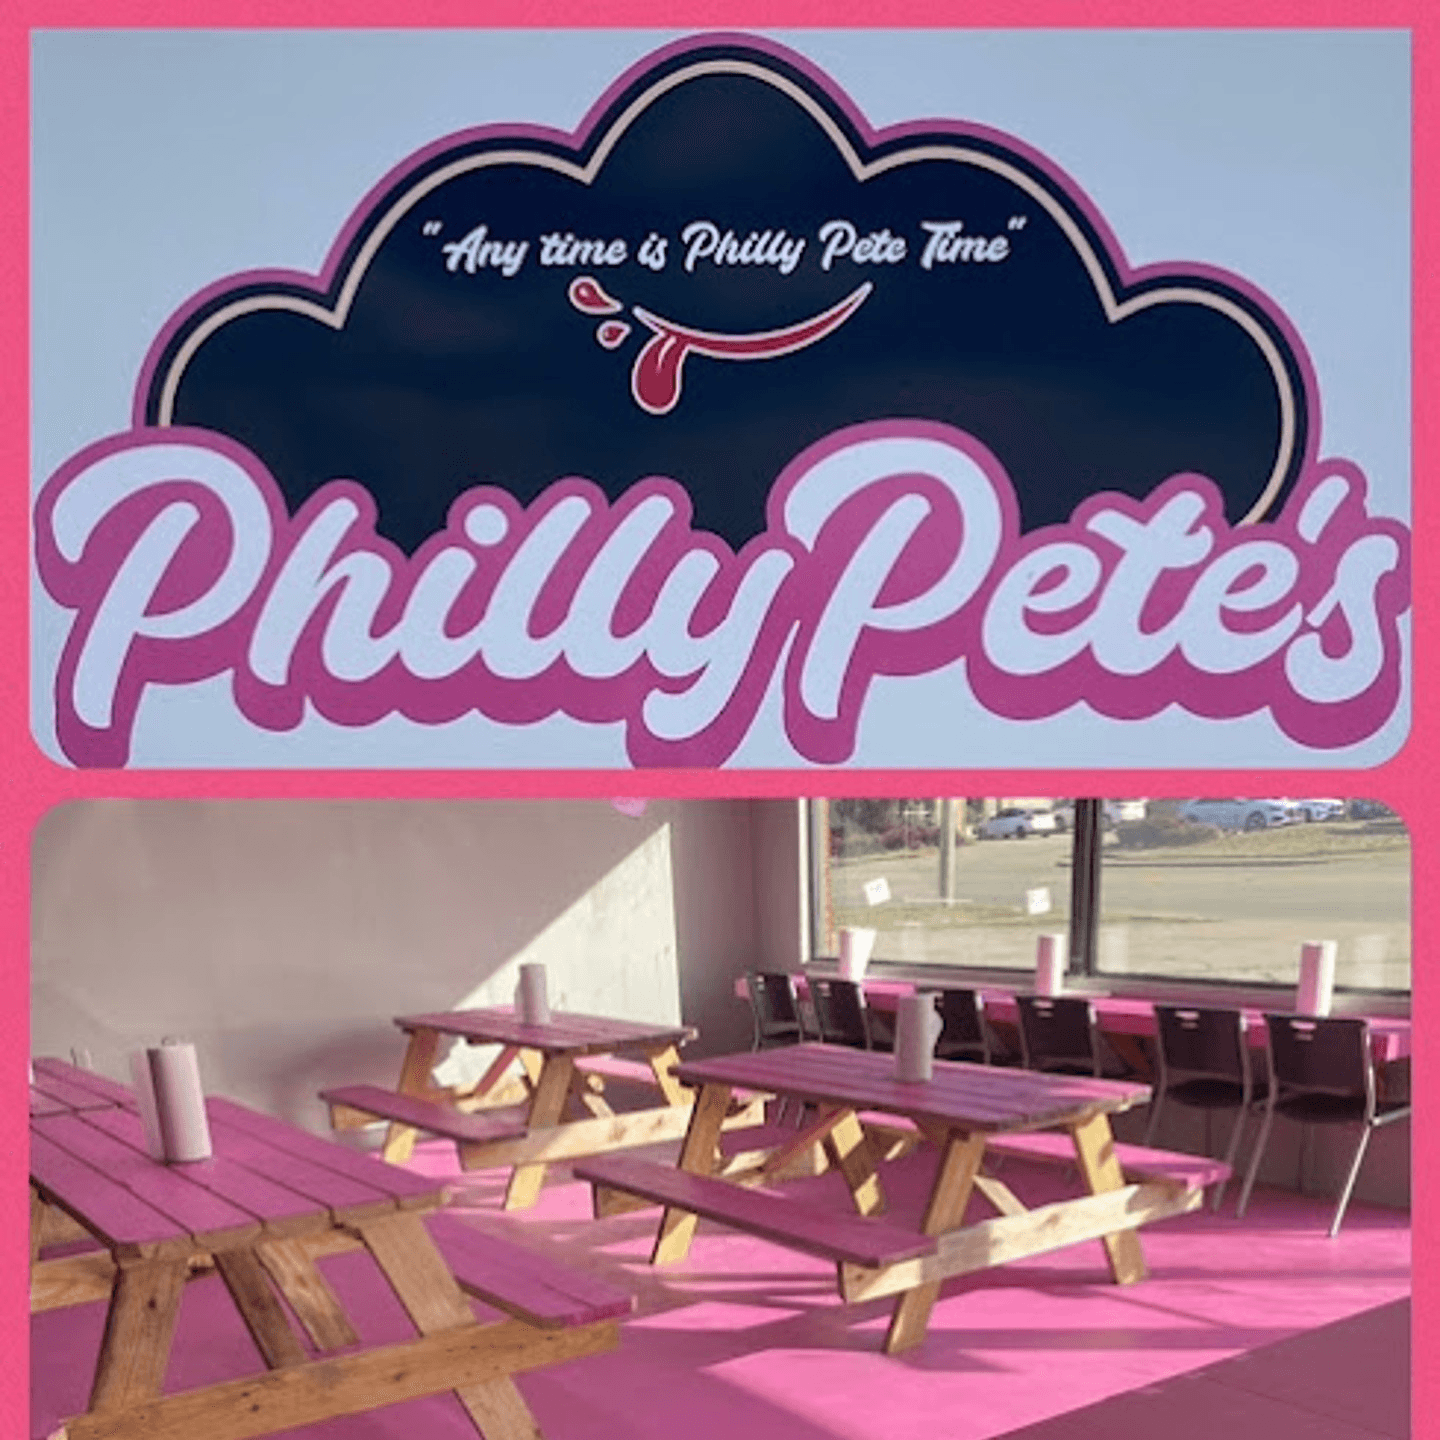 Welcome to Philly Pete's!